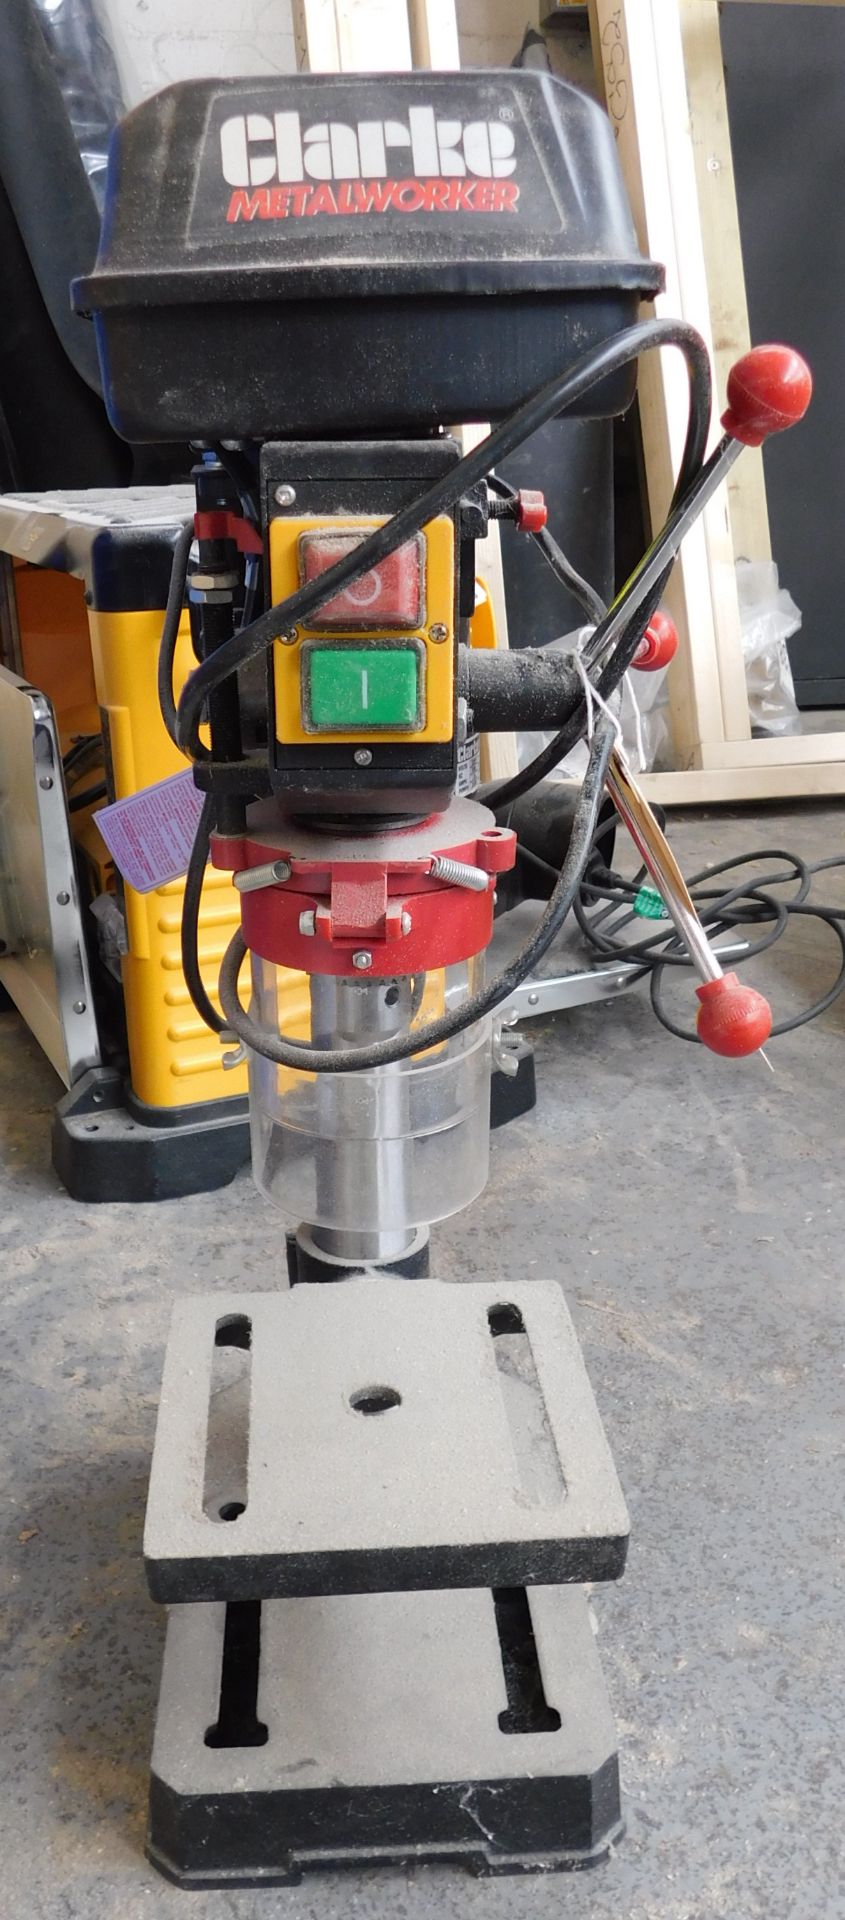 Clarke Metalworker COP102B Bench Drill, 240v (Located: Barton-le-Clay. Please Refer to General - Image 3 of 3